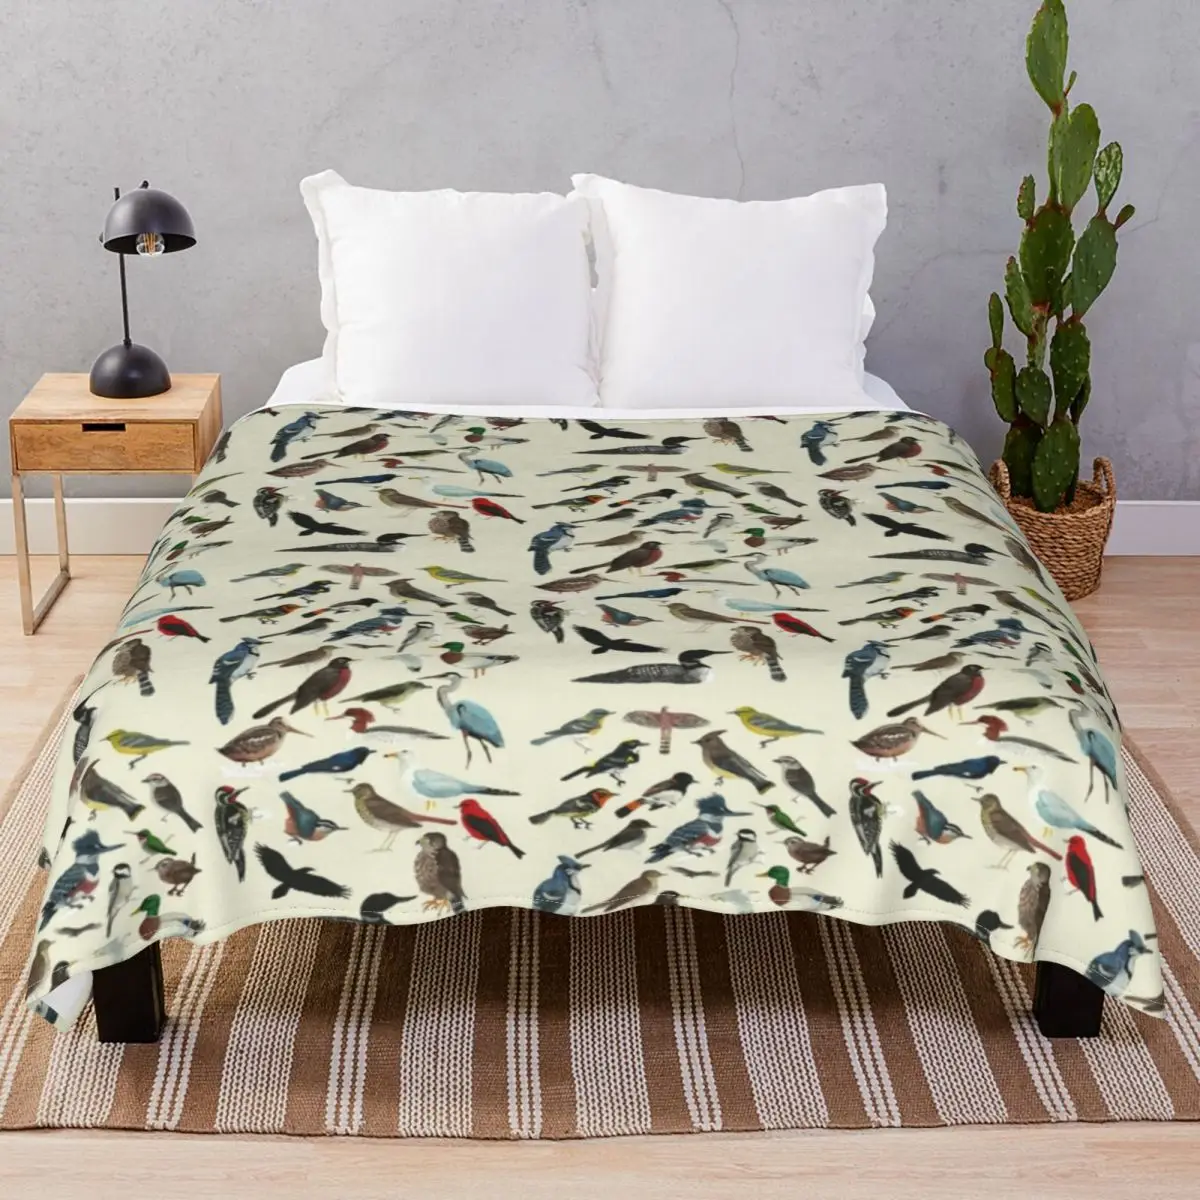 Bird Fanatic Blanket Fleece All Season Multi-function Throw Blankets for Bed Home Couch Camp Office